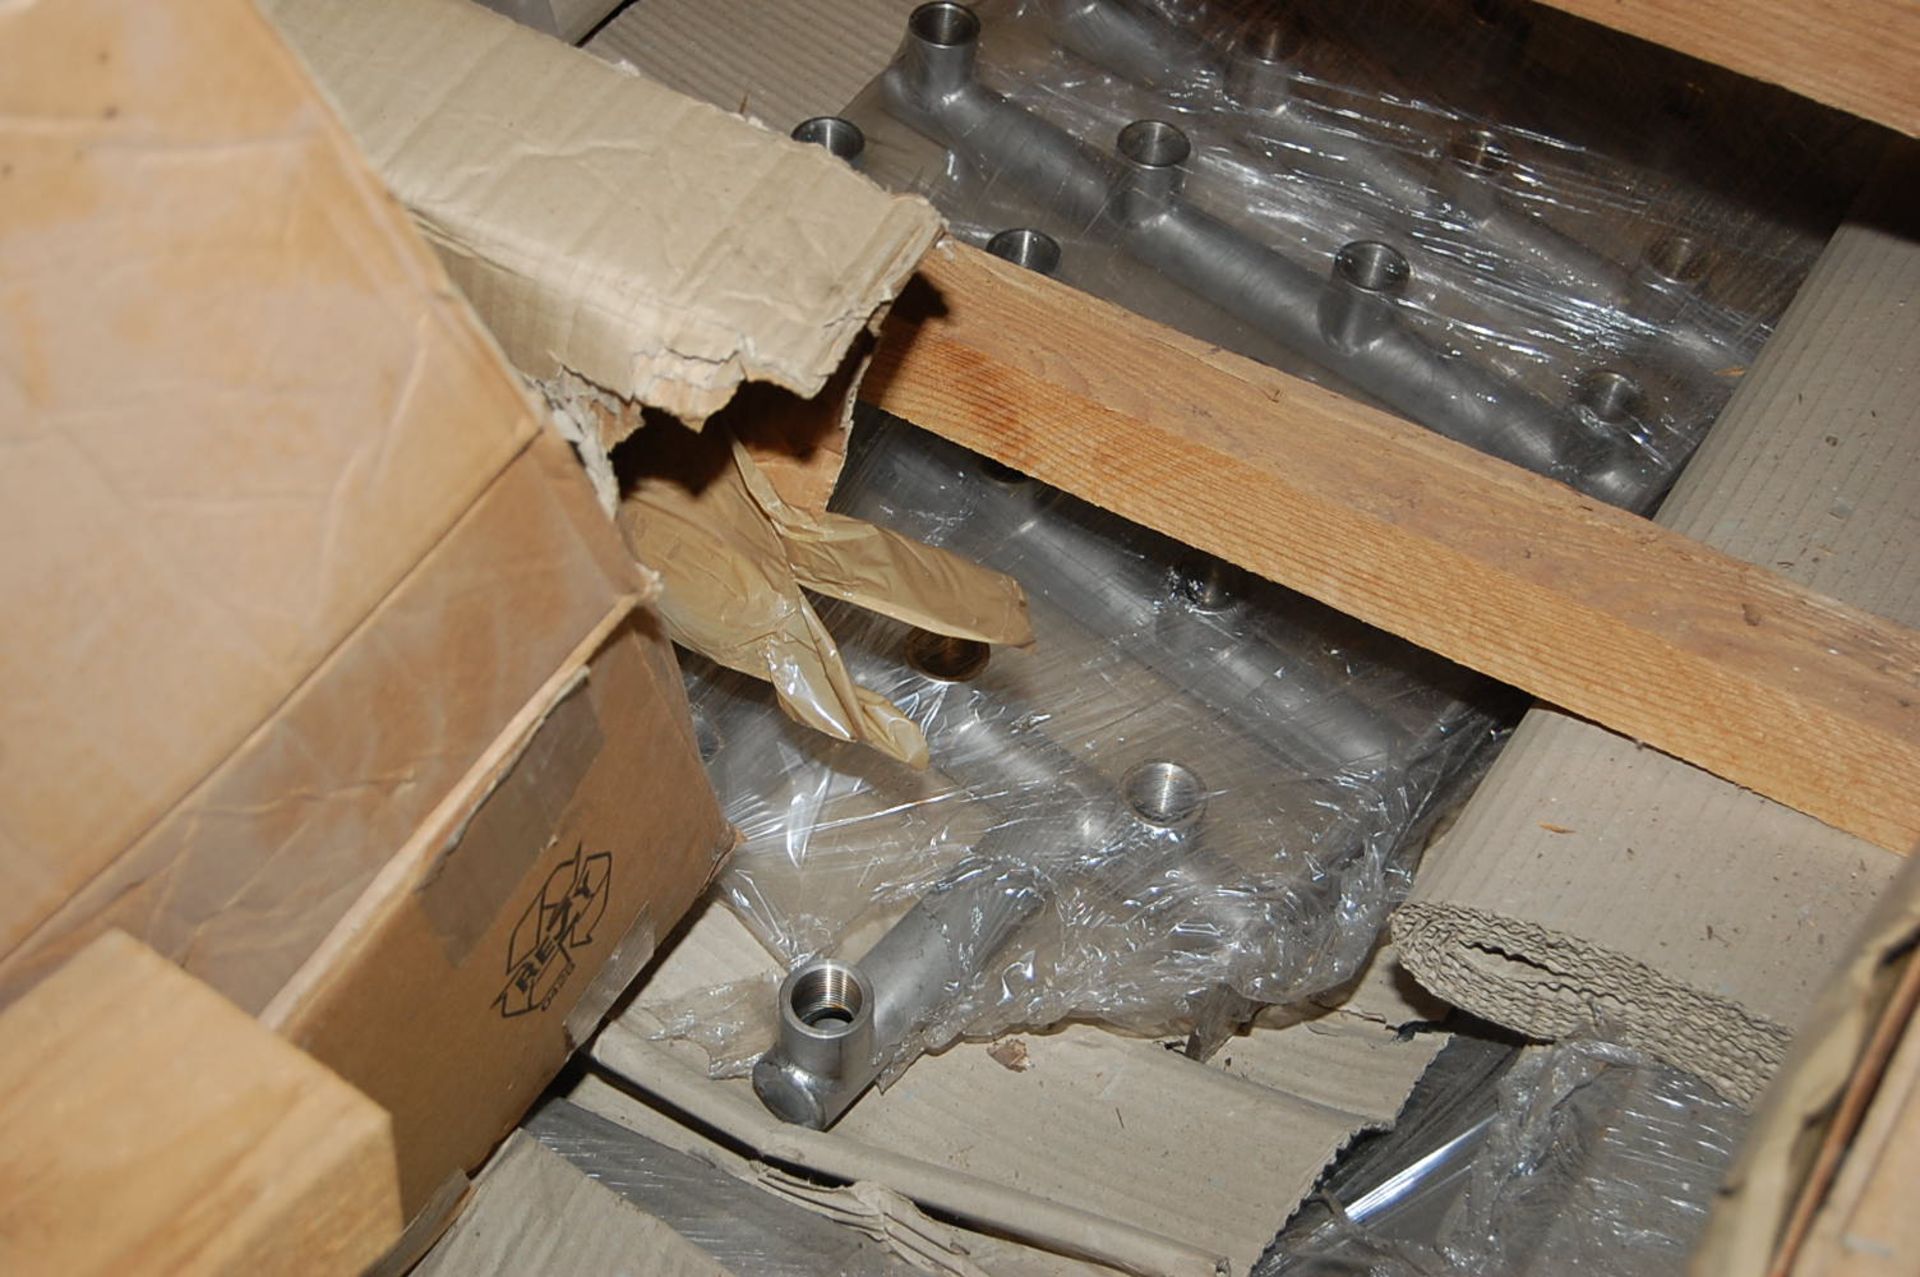 Crate - SS Parts & Components, Assorted Plugs, Washers, Stainless Steel Clamps - Rigging Fee $50, I - Image 3 of 3